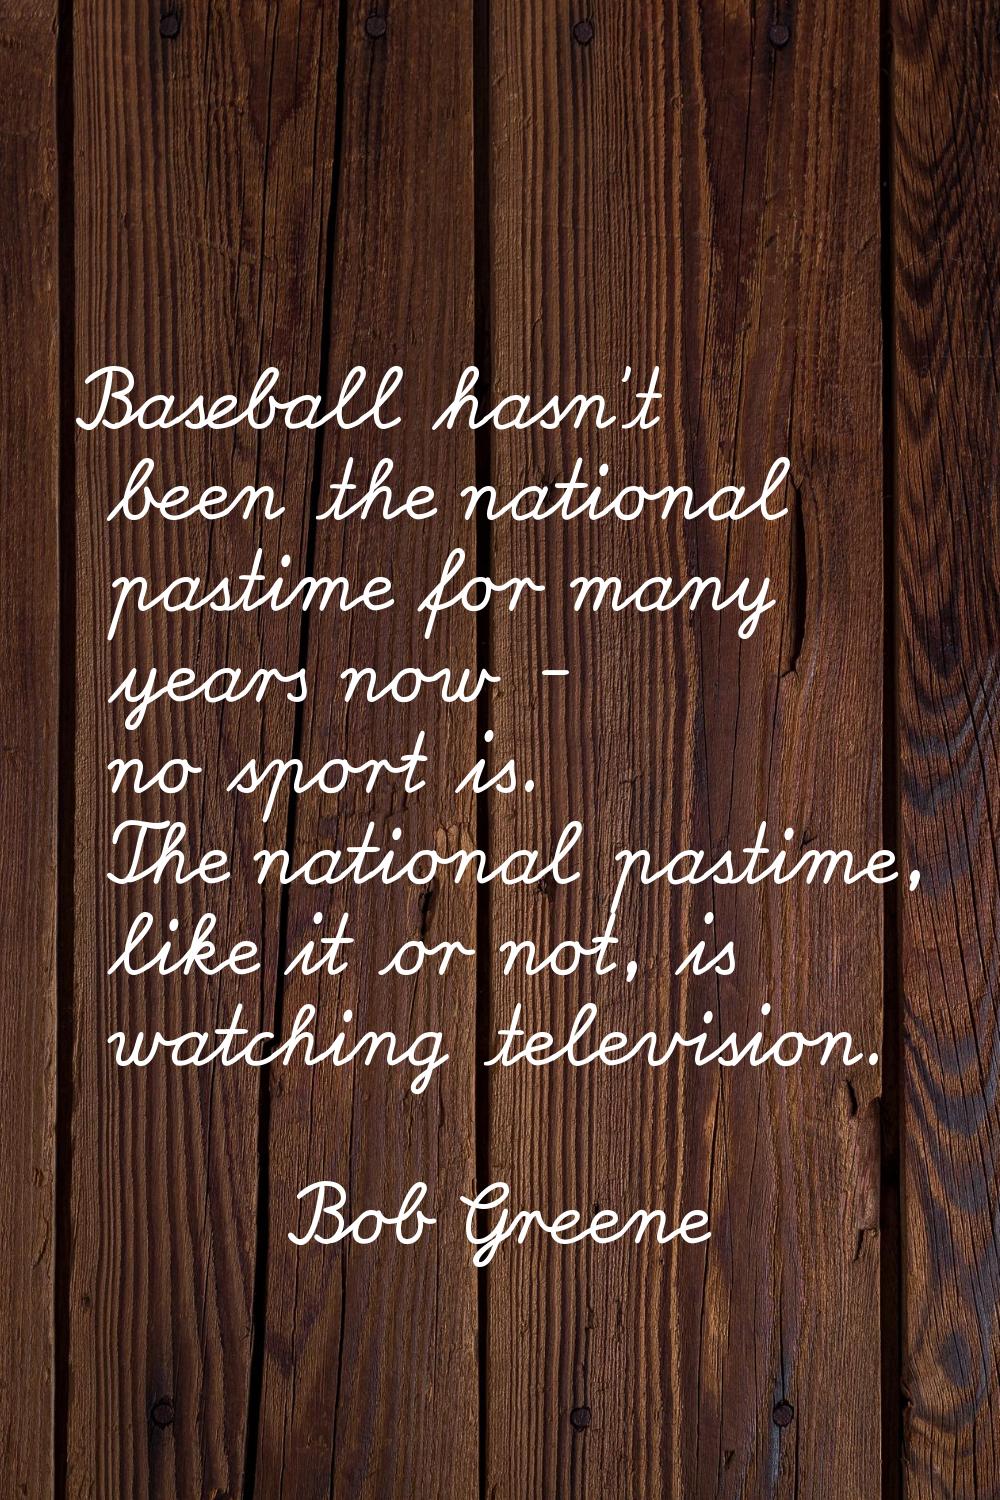 Baseball hasn't been the national pastime for many years now - no sport is. The national pastime, l